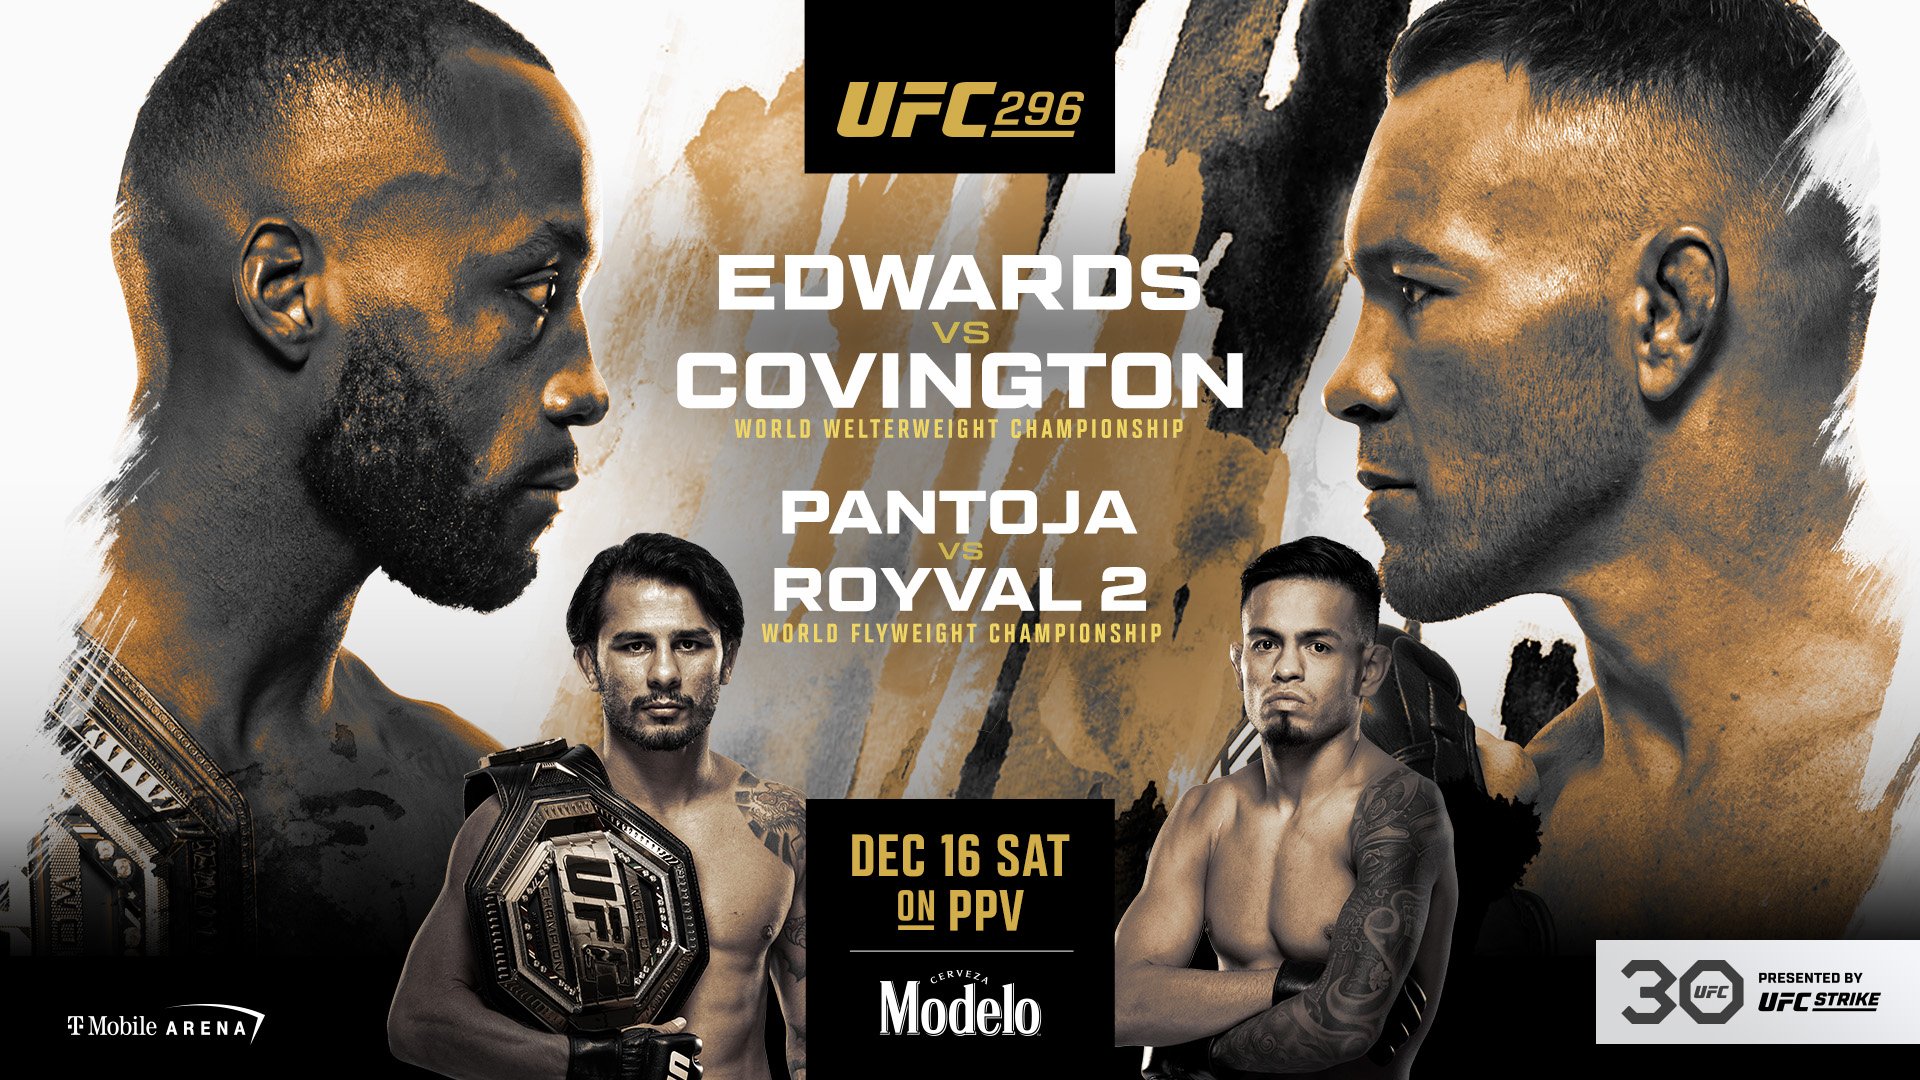 Official Poster for UFC 296: Leon Edwards vs. Colby Covington